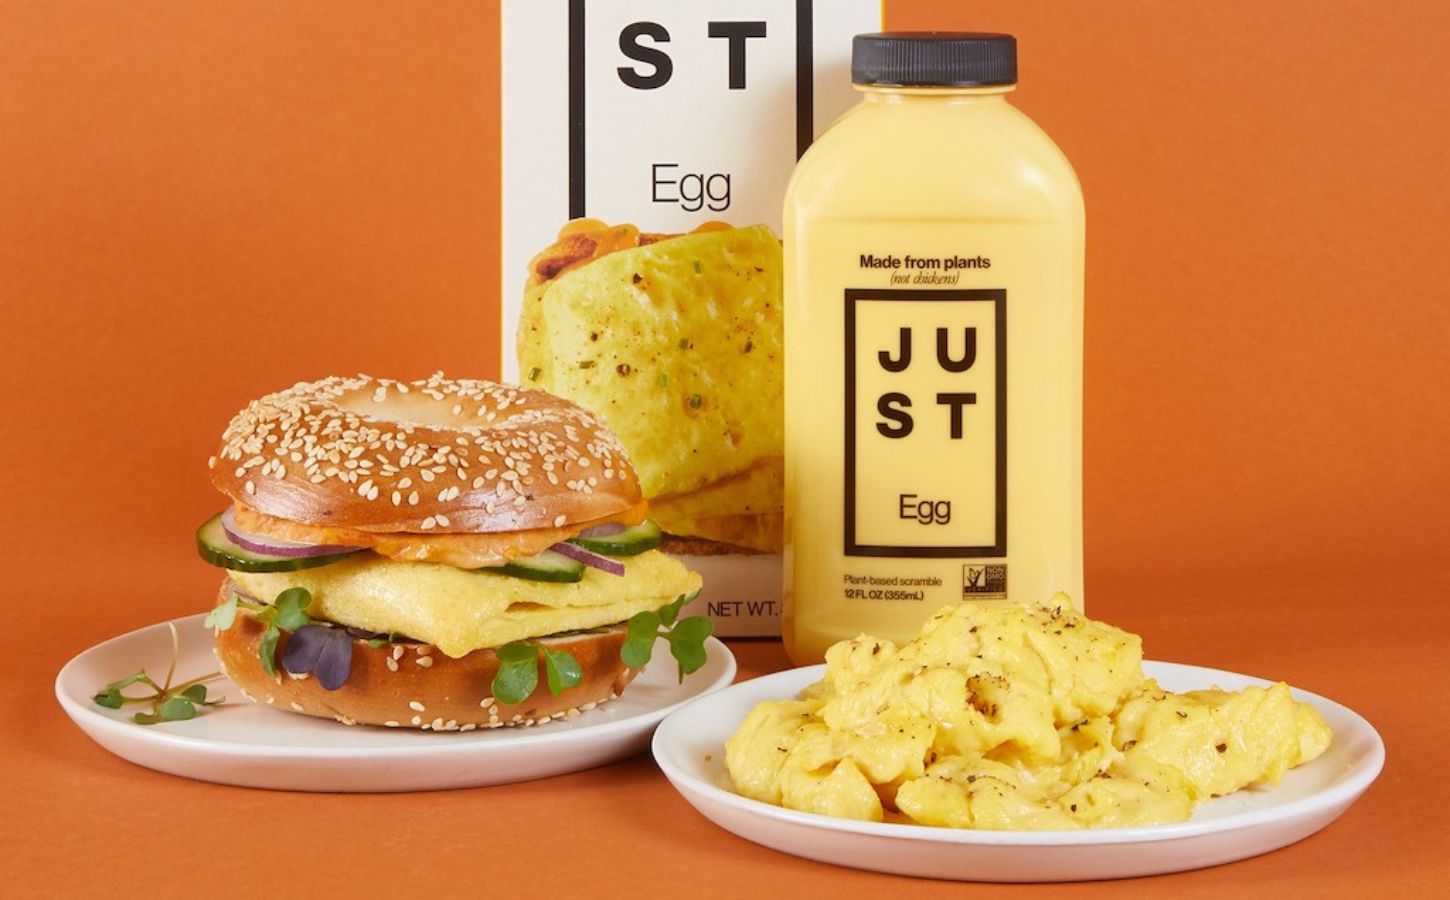 A selection of vegan egg products made by US plant-based food brand JUST egg